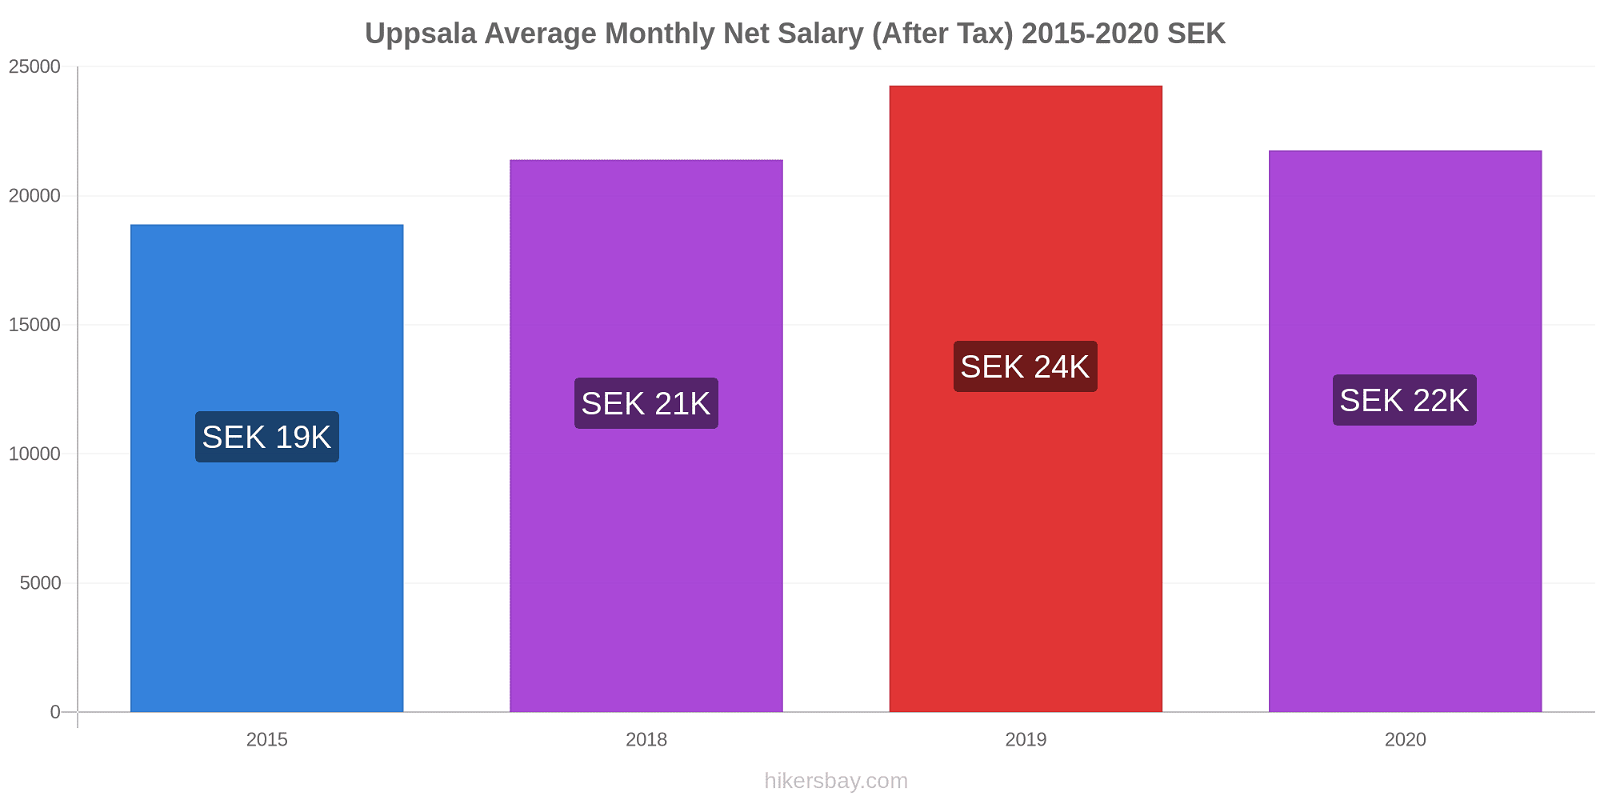 Uppsala price changes Average Monthly Net Salary (After Tax) hikersbay.com